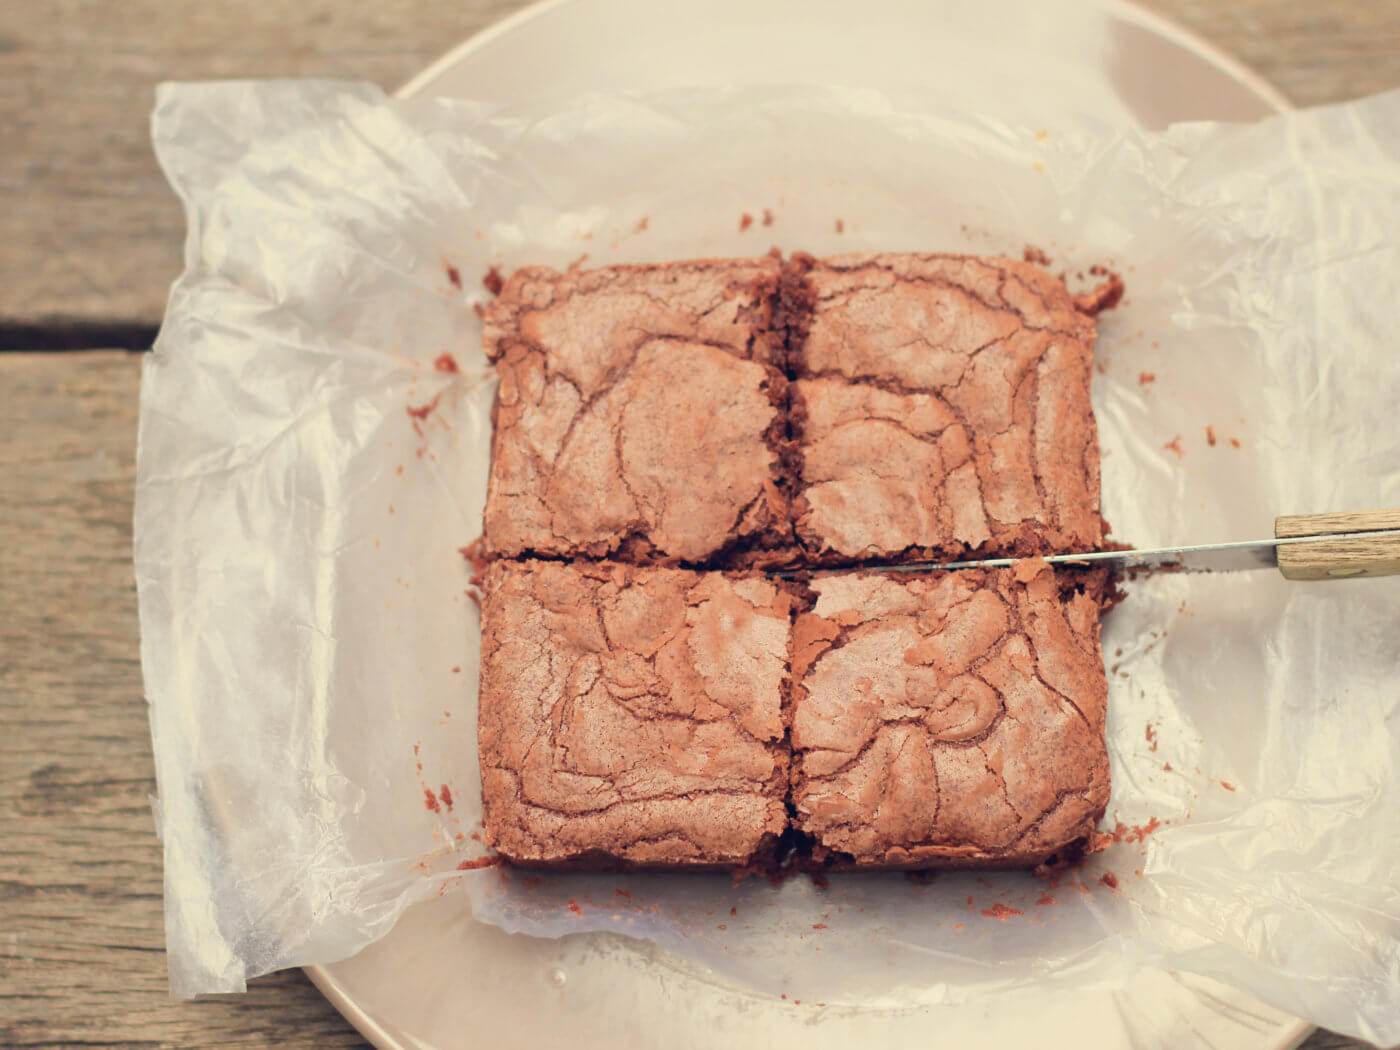 Cutting crispy homemade brownie with retro filter effect